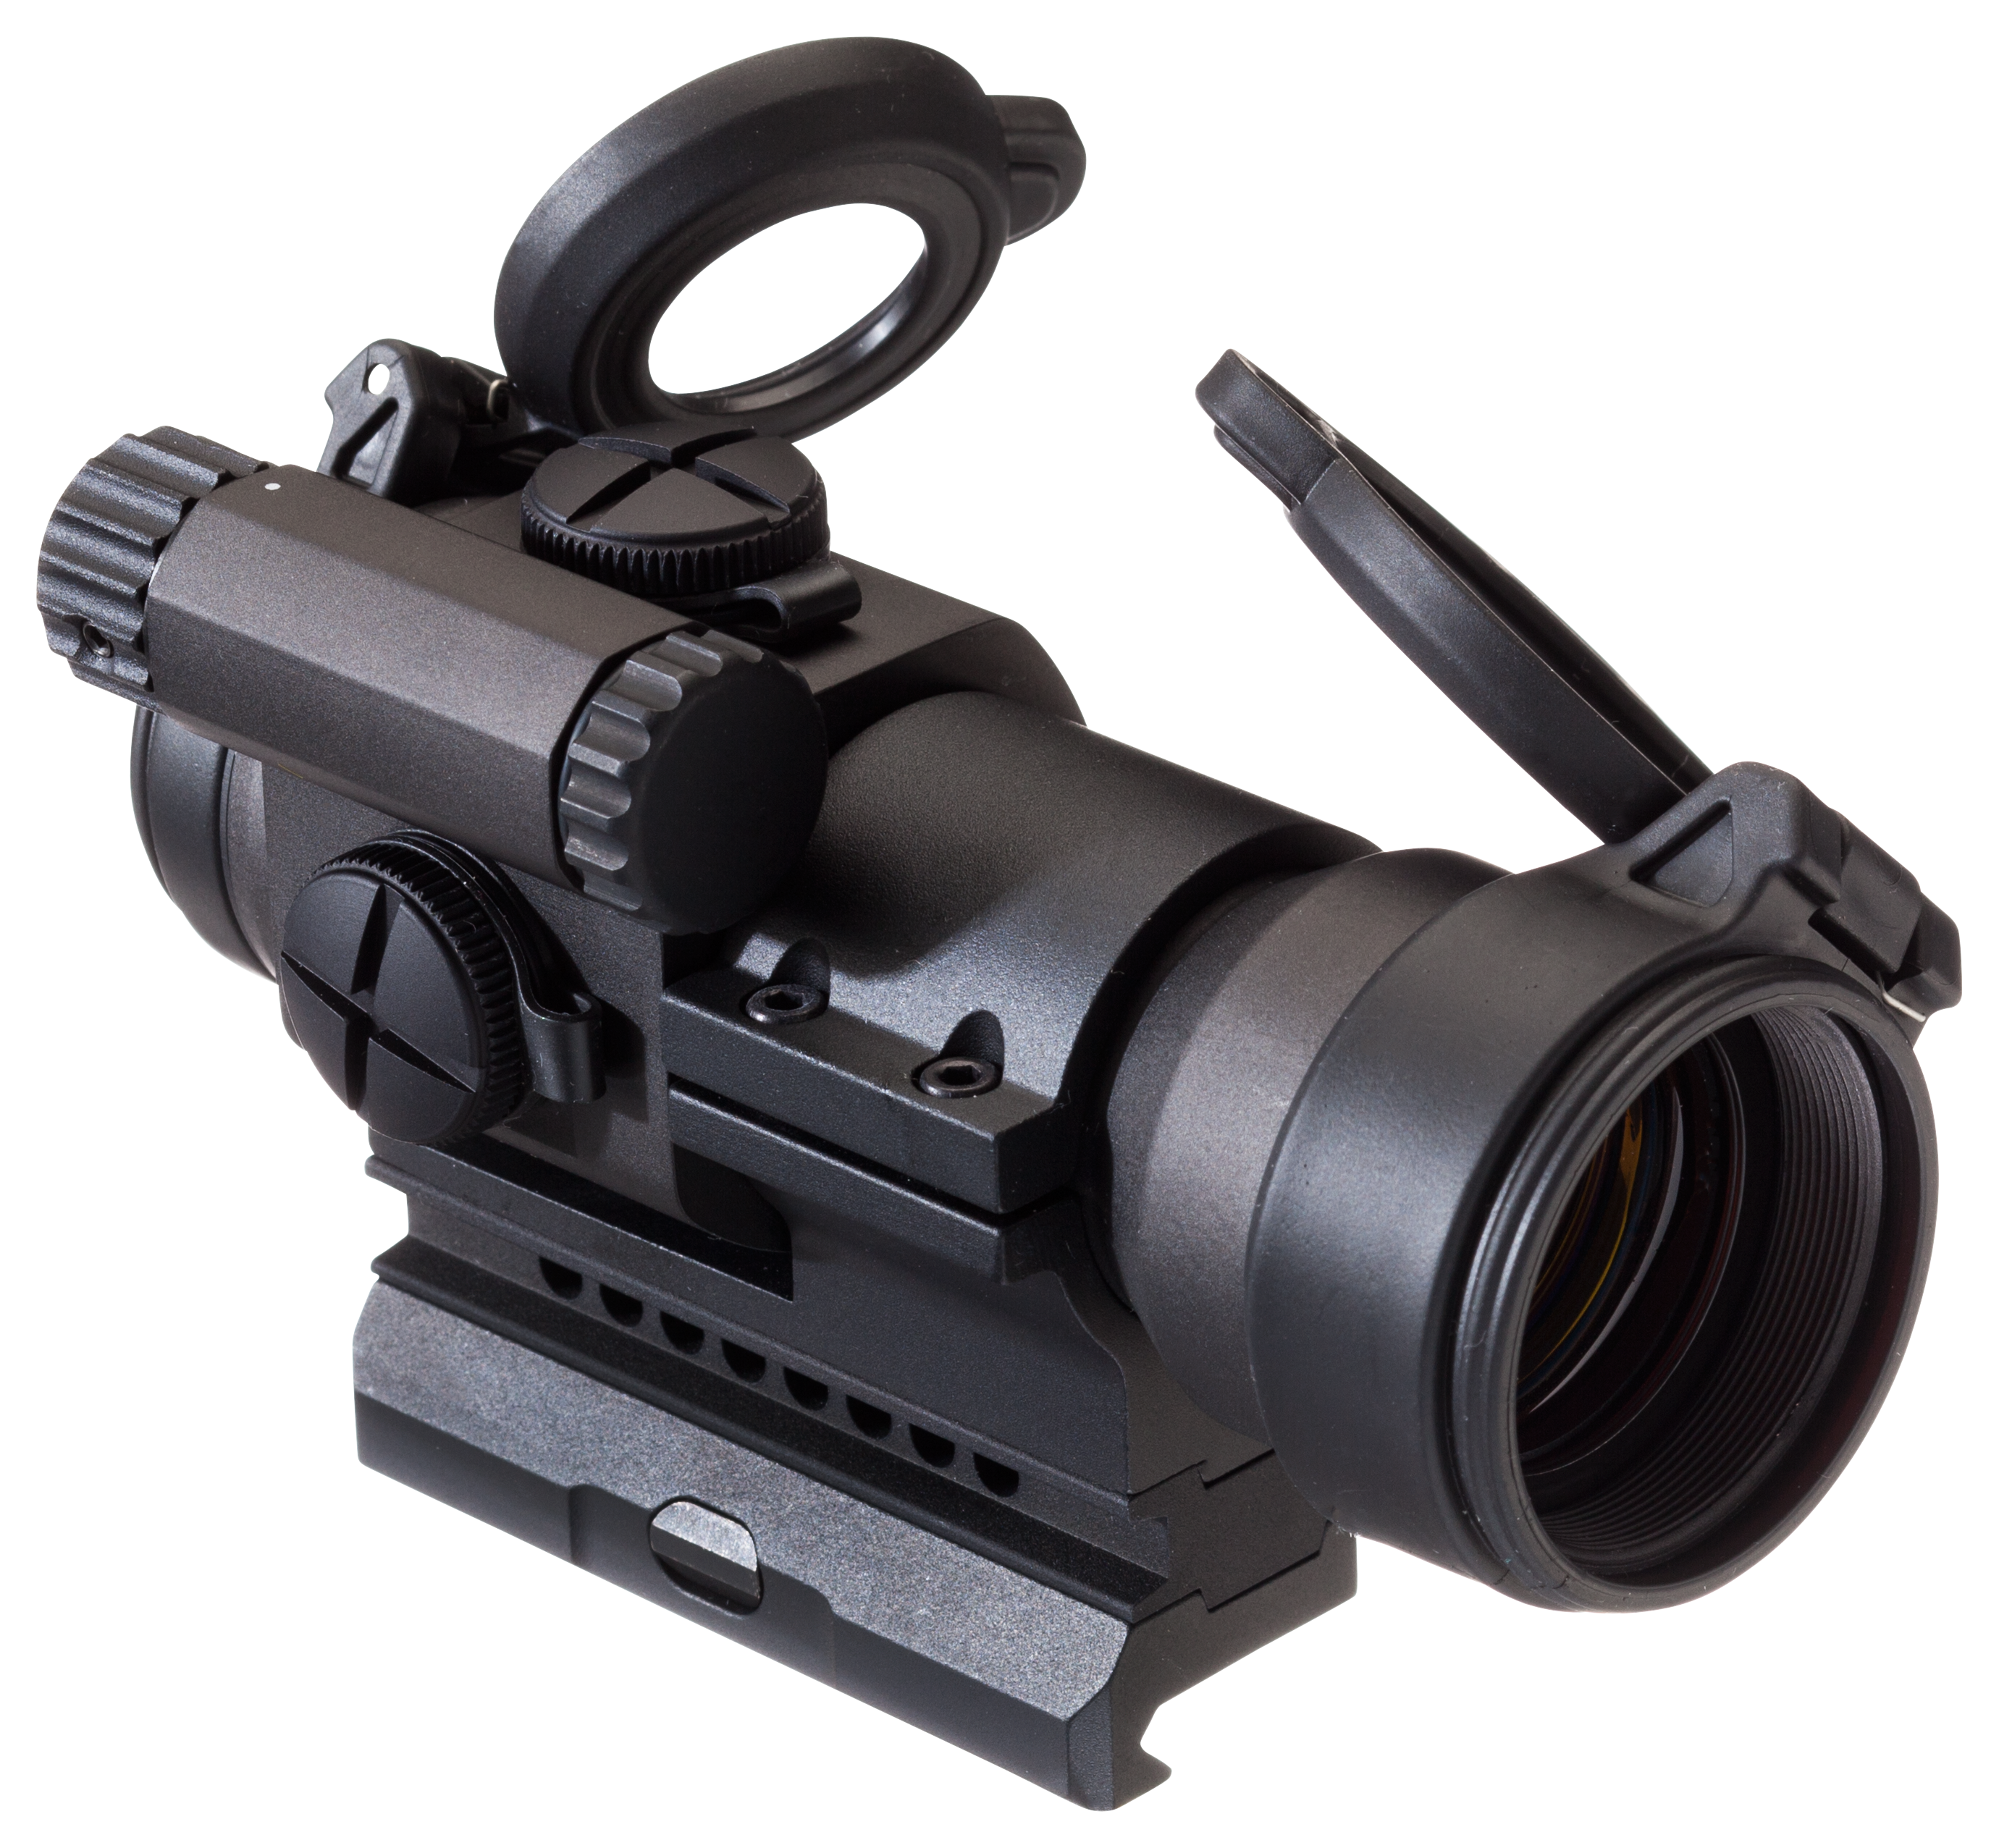 Aimpoint PRO (Patrol Rifle Optic) - Midwest Industries, Inc.